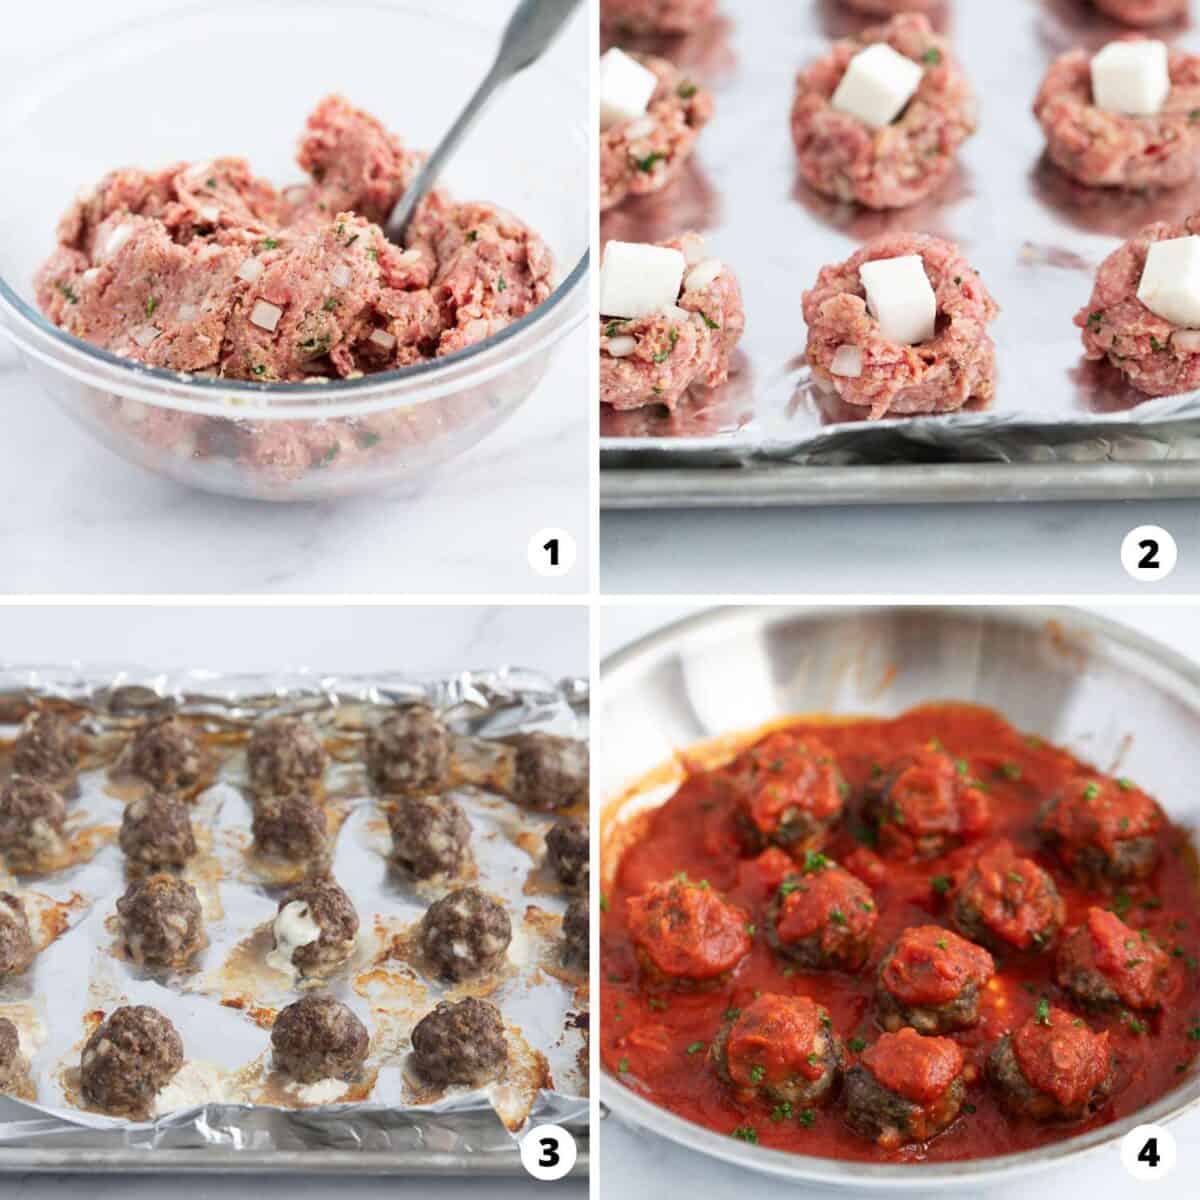 Showing how to make stuffed meatballs in a 4 step collage.